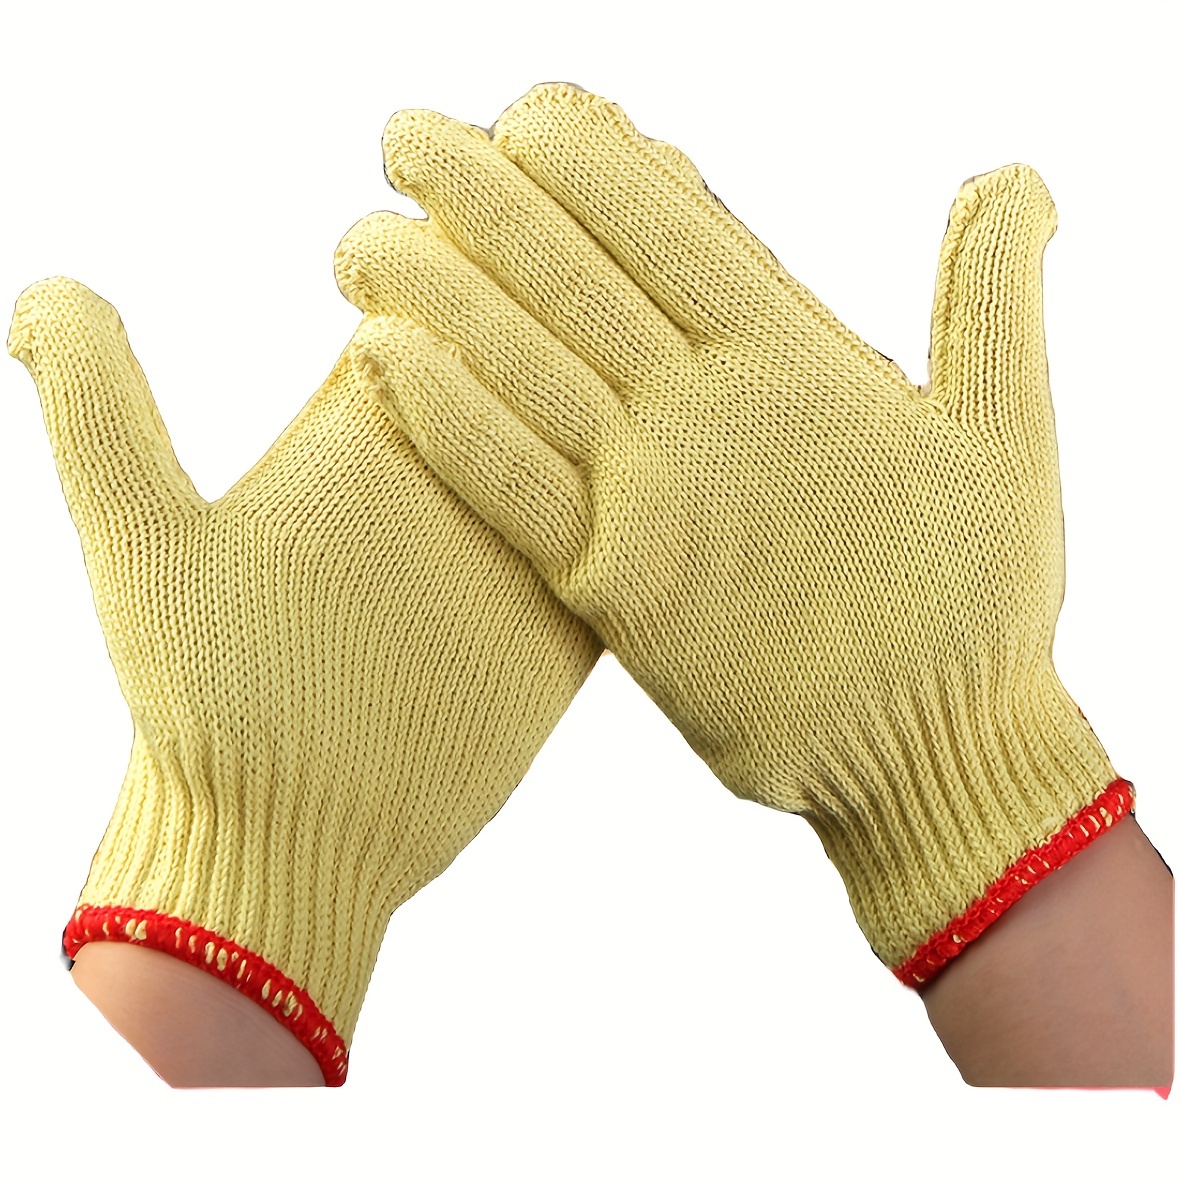 1 Pair Premium Cut Resistant Gloves, 7 Guage, Heat Resistant Anti-Slip  Safety Cuts Gloves For Glass Handling, Wood Carving And Gardening